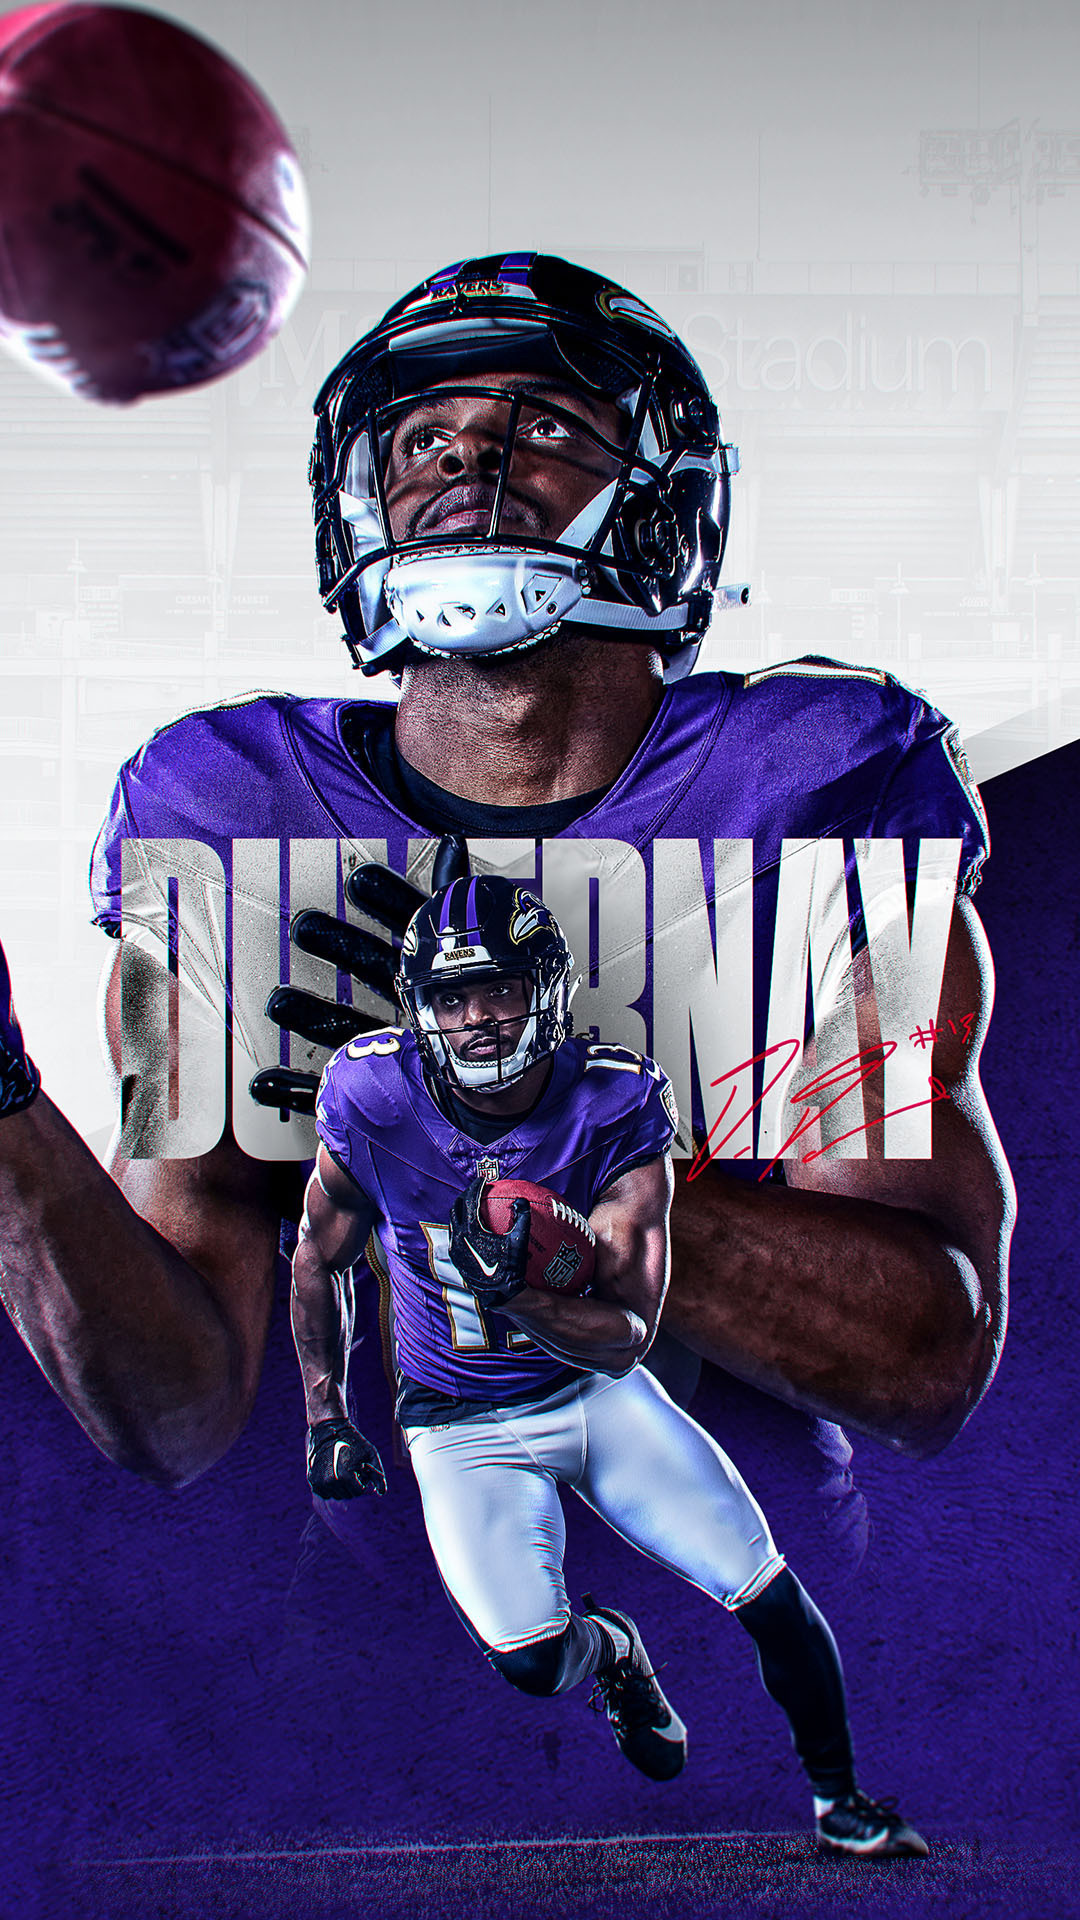 50+ HD NFL Wallpapers 1080p For Desktop (2020) - Page 2 of 5 - We 7